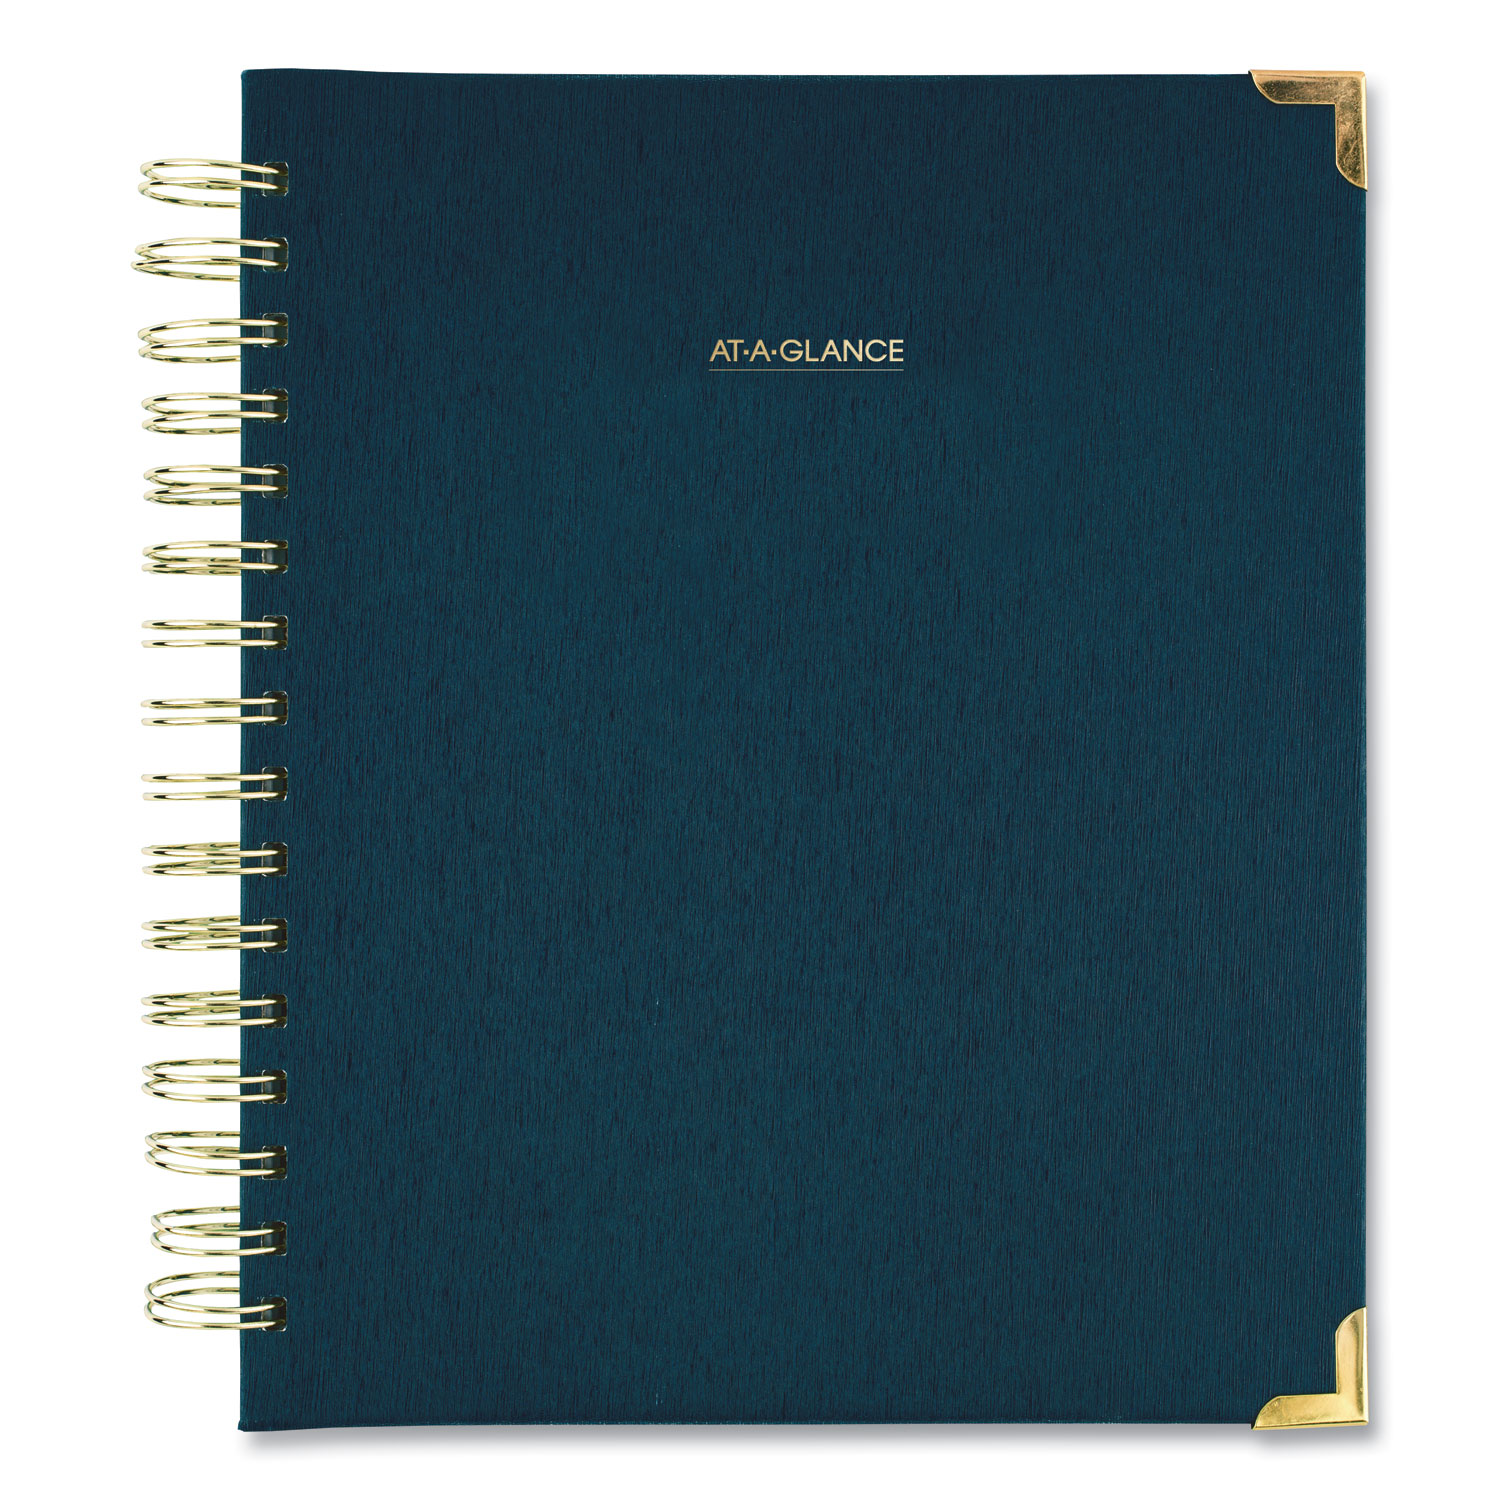 AT-A-GLANCE® Harmony Weekly/Monthly Hardcover Planner, 8.75 x 7, Navy Blue, 2021